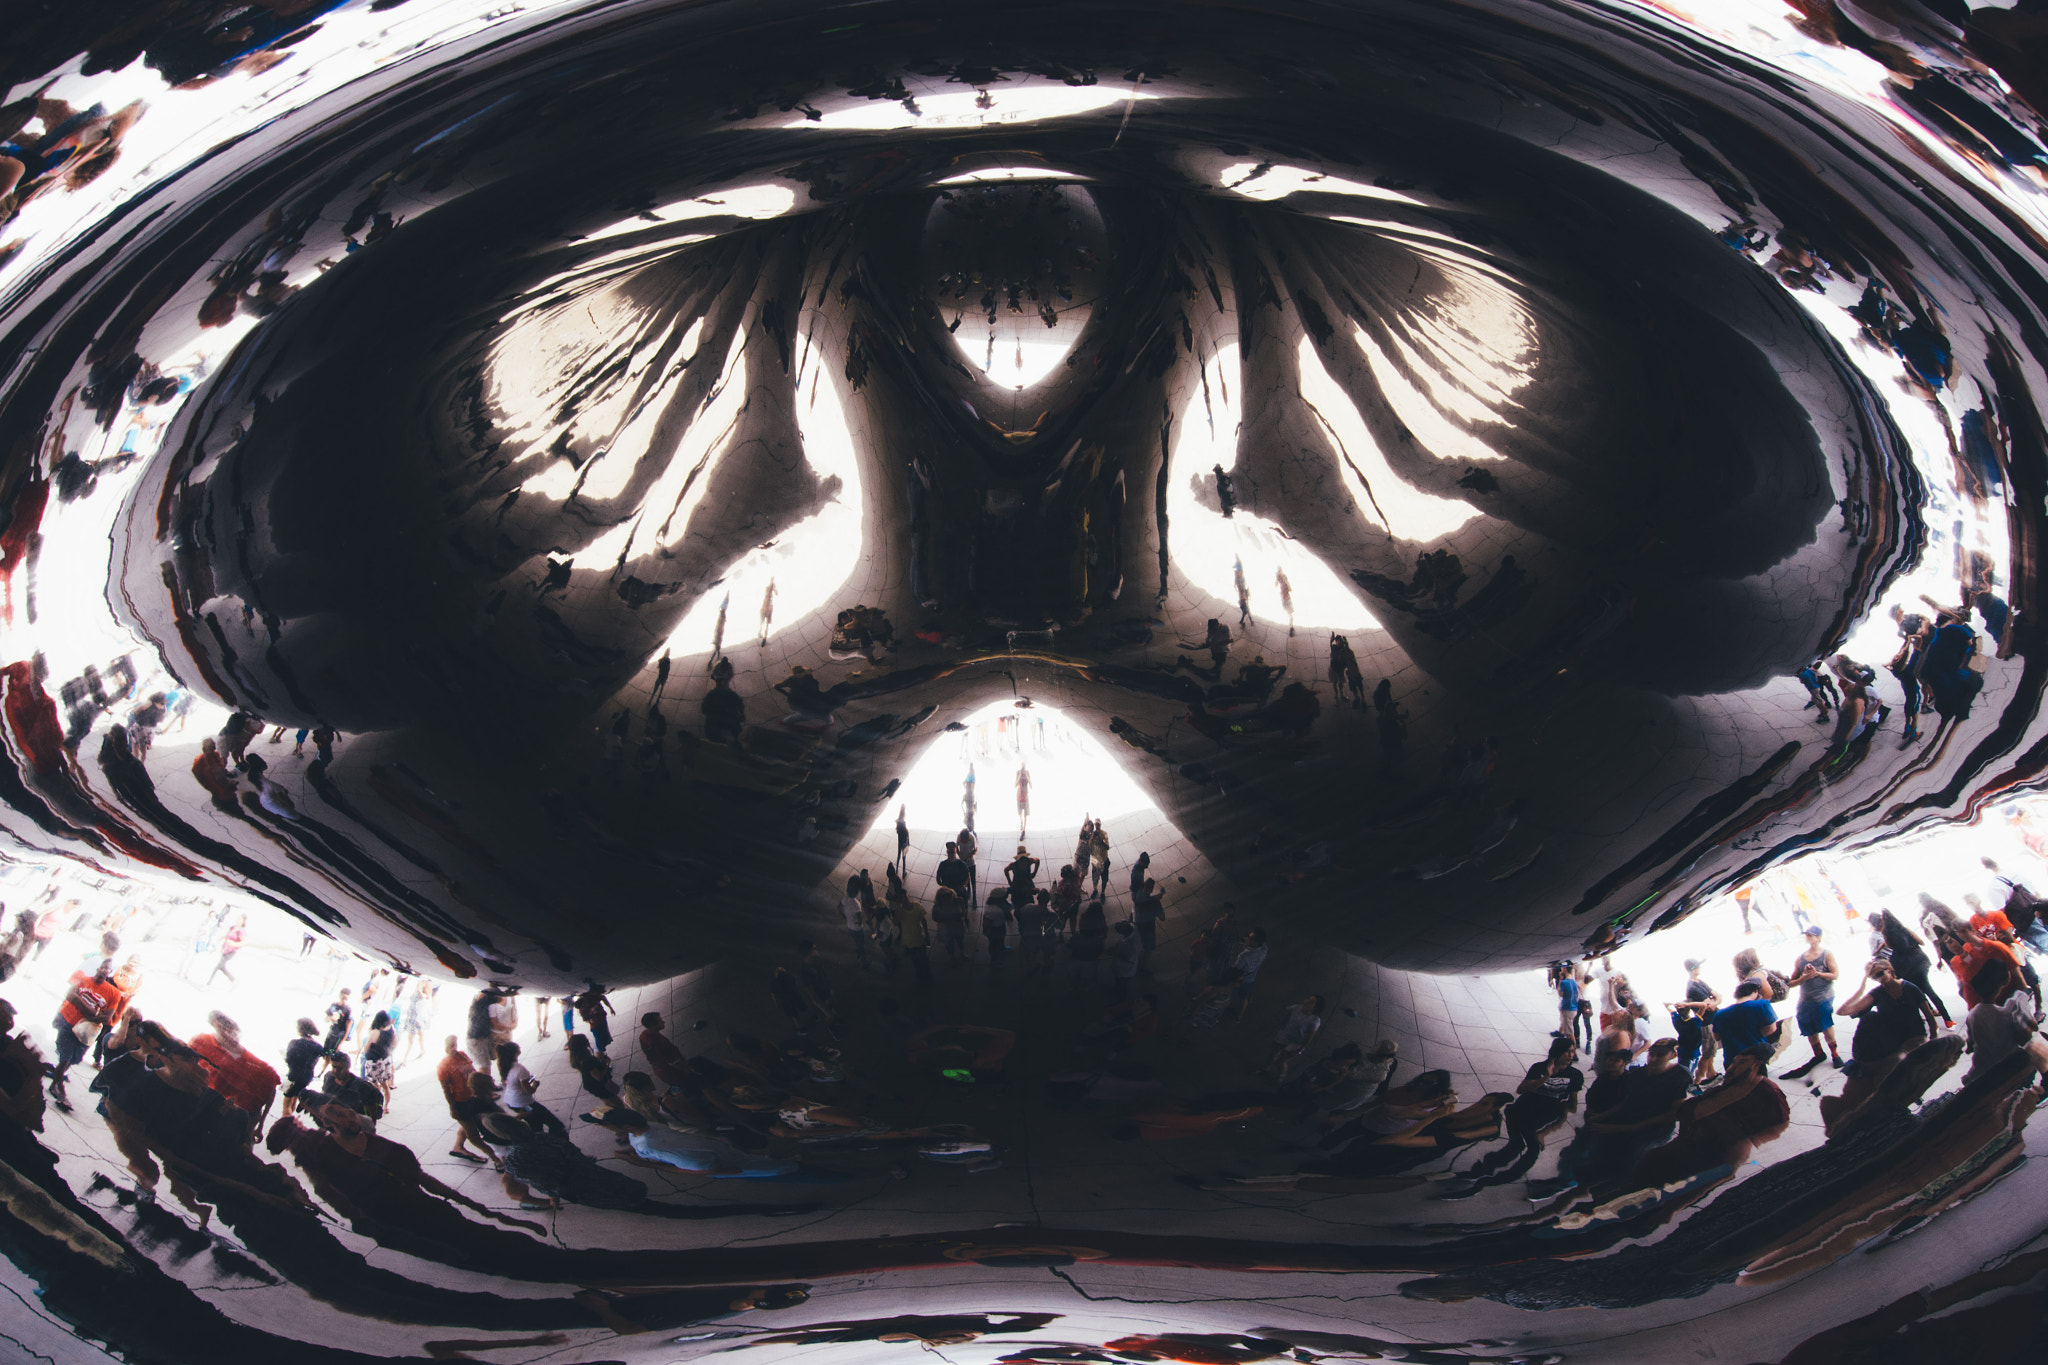 Canon EOS 700D (EOS Rebel T5i / EOS Kiss X7i) + Tokina AT-X 11-20 F2.8 PRO DX Aspherical 11-20mm f/2.8 + 1.4x sample photo. Cloud gate photography